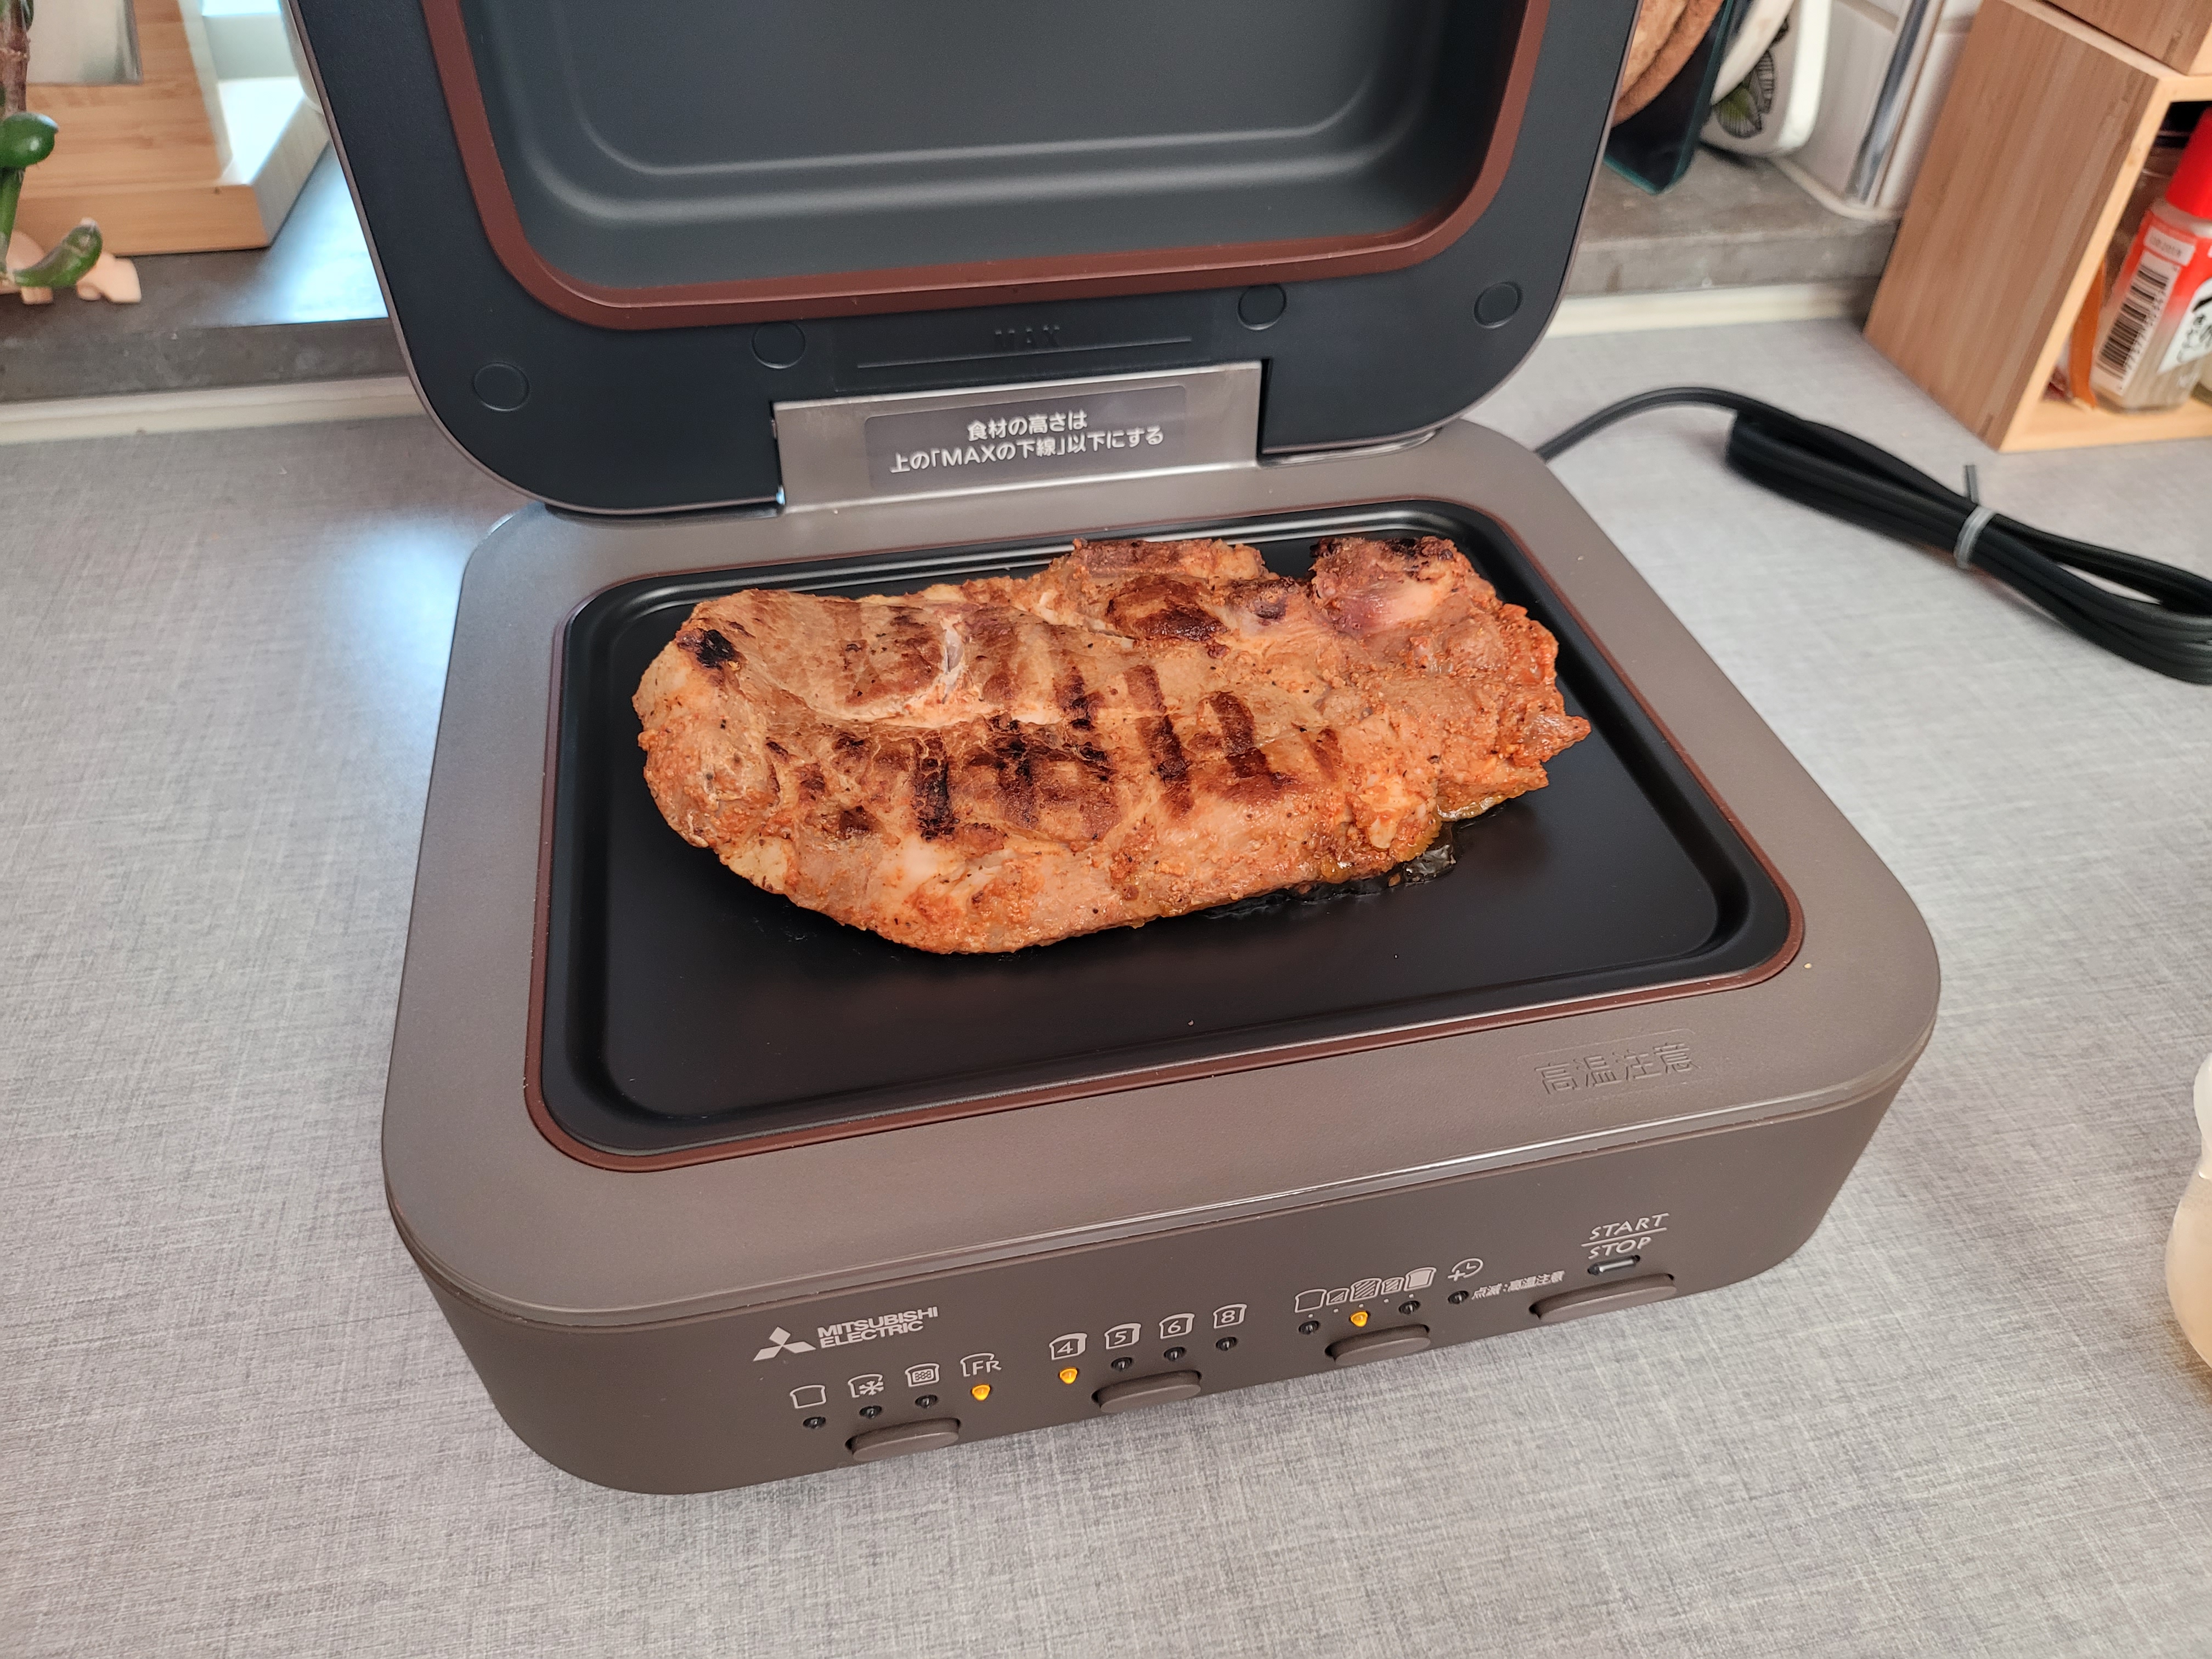 Kiririn on X: Initial thoughts on the world's most expensive toaster 1)  GOD HECK IT TOASTS EVENLY, especially brioche where conventional toasters  undertoast (Left; and anything more would cause burnt spots) 2)